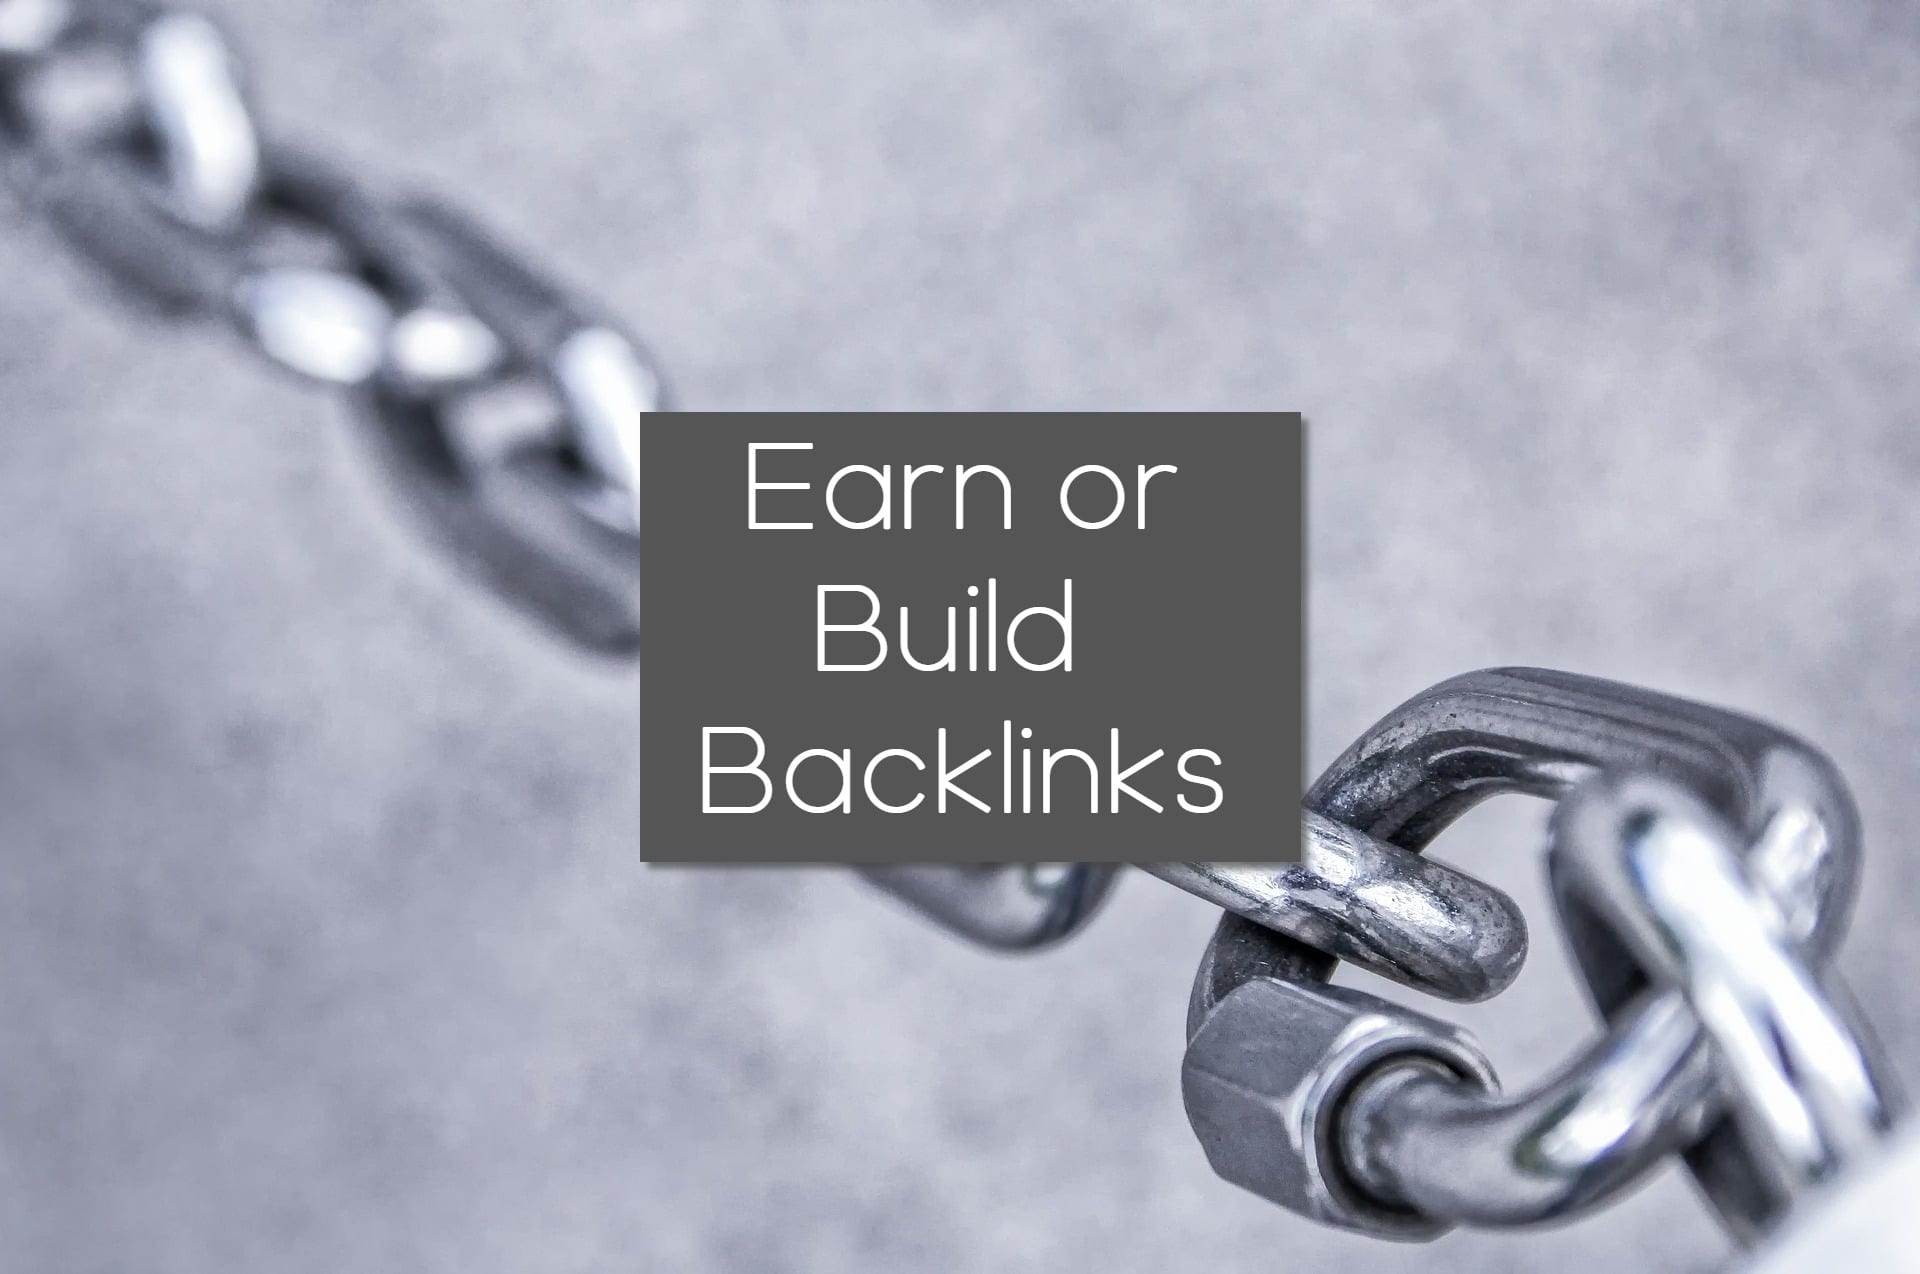 10 Smart Ways to Earn or Build Backlinks to Your Website